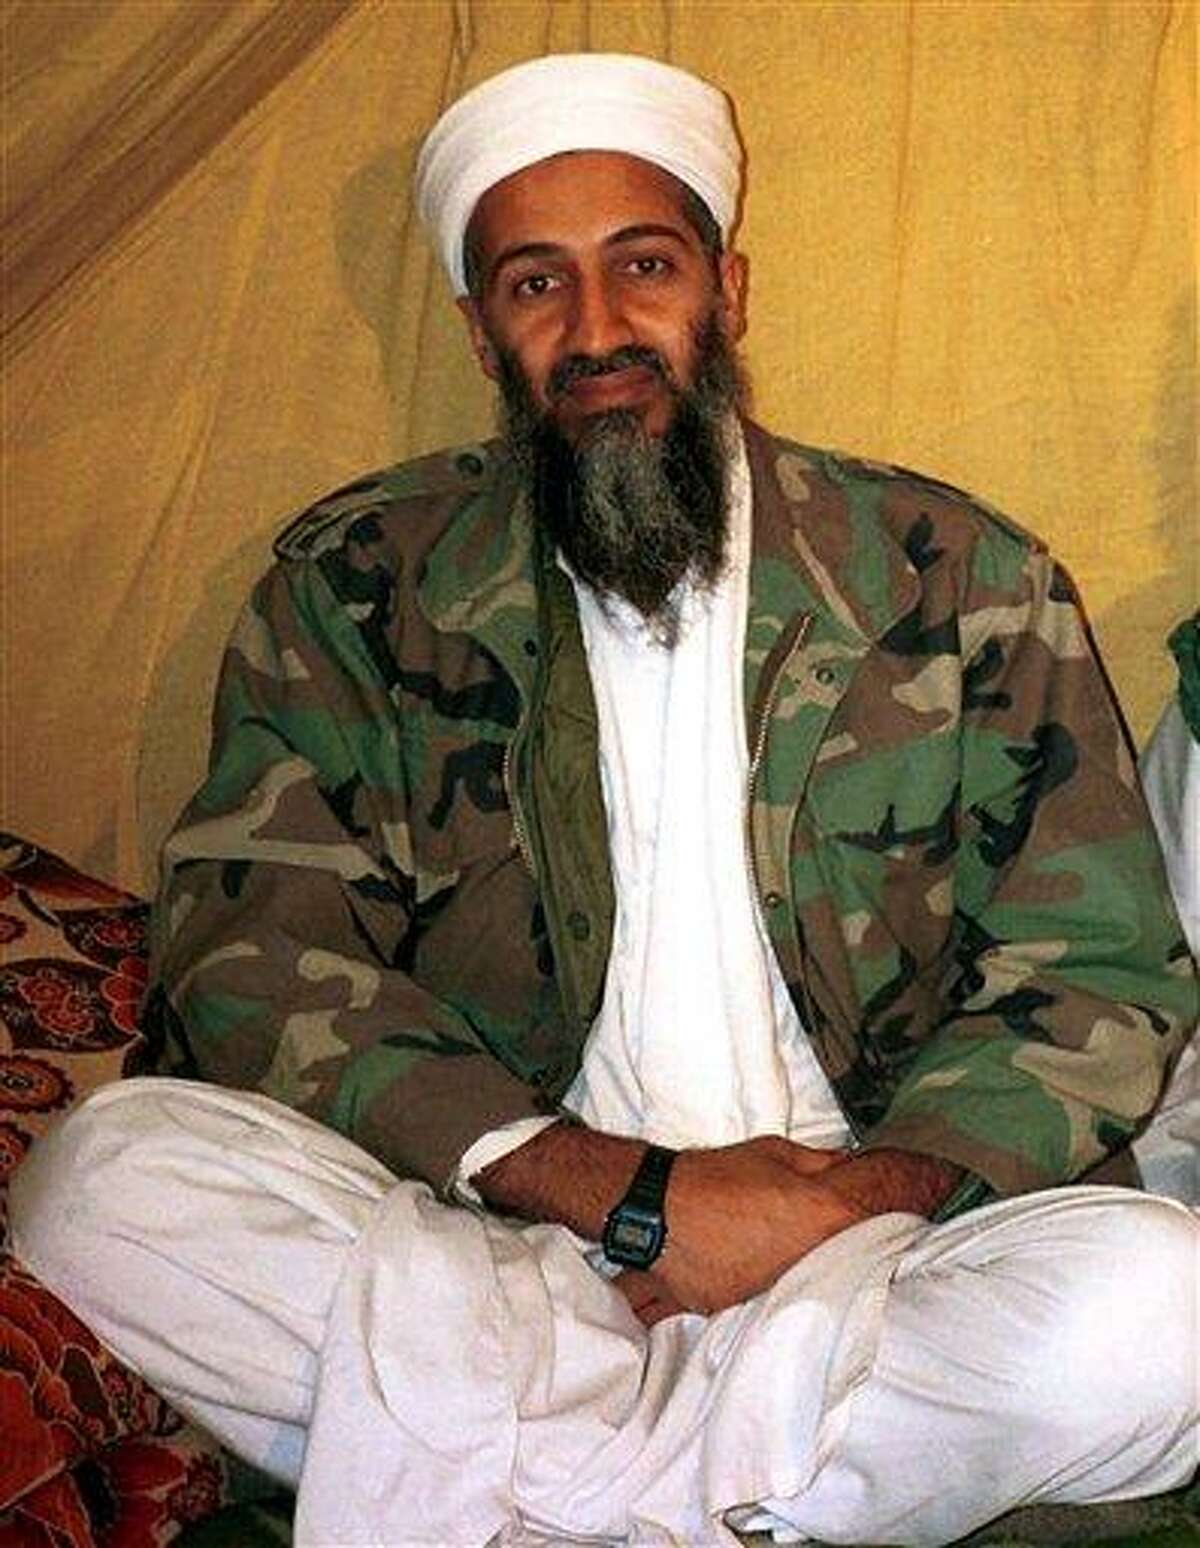 FILE -This undated file photo, shows Osama bin Laden. Americans are expected to get a glimpse of Osama bin Laden's daily life with the disclosure of home videos showing him strolling around his secret compound, along with propaganda tapes that have never been made public (AP Photo/File)